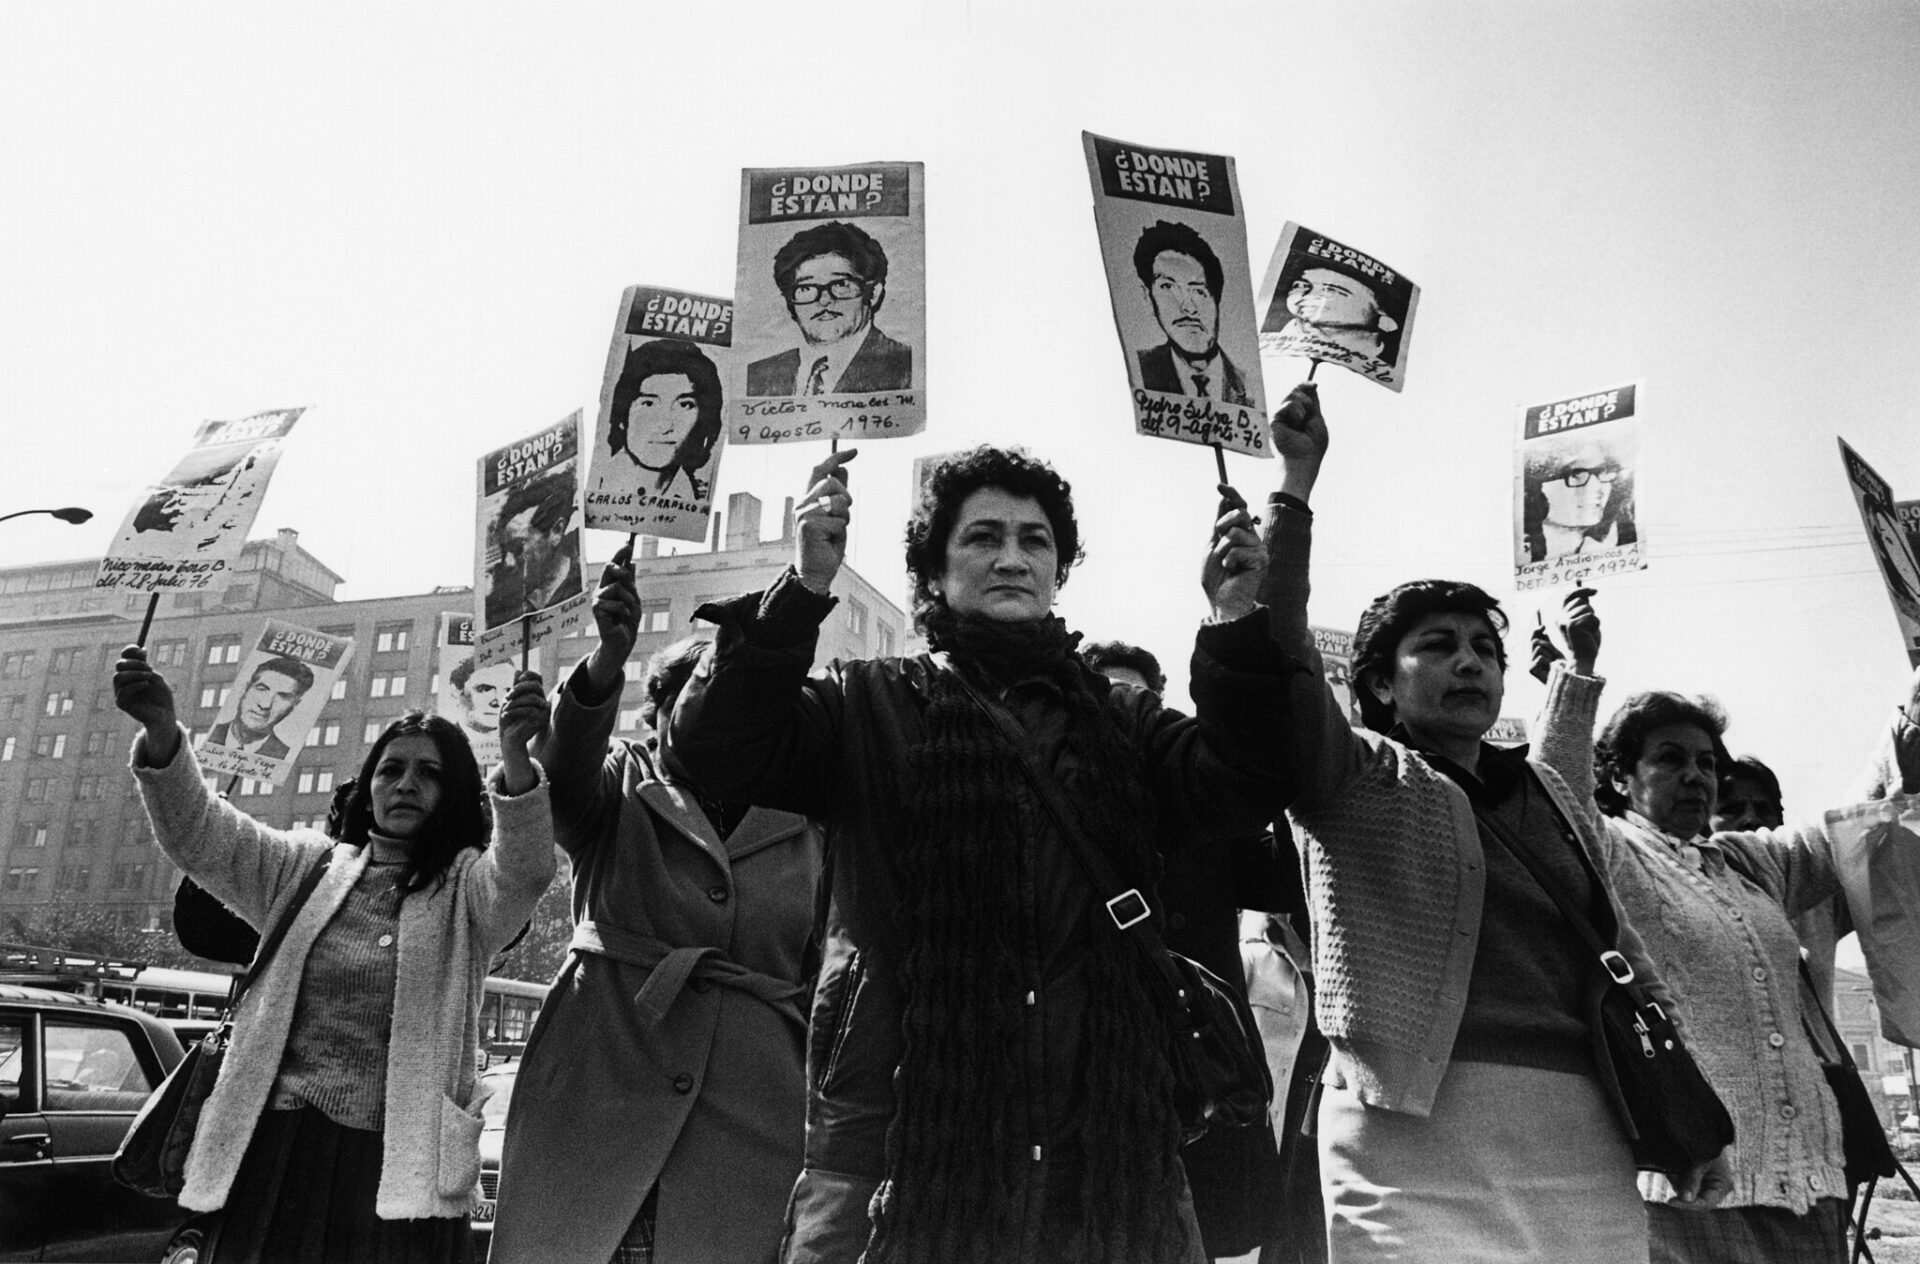 Women from the Group of Missing Relatives demonstrate in front of the Government Palace during the Pinochet Military Regime (Kena Lorenzini donated to the Museum of Memory and Human Rights via Wikimedia Commons)